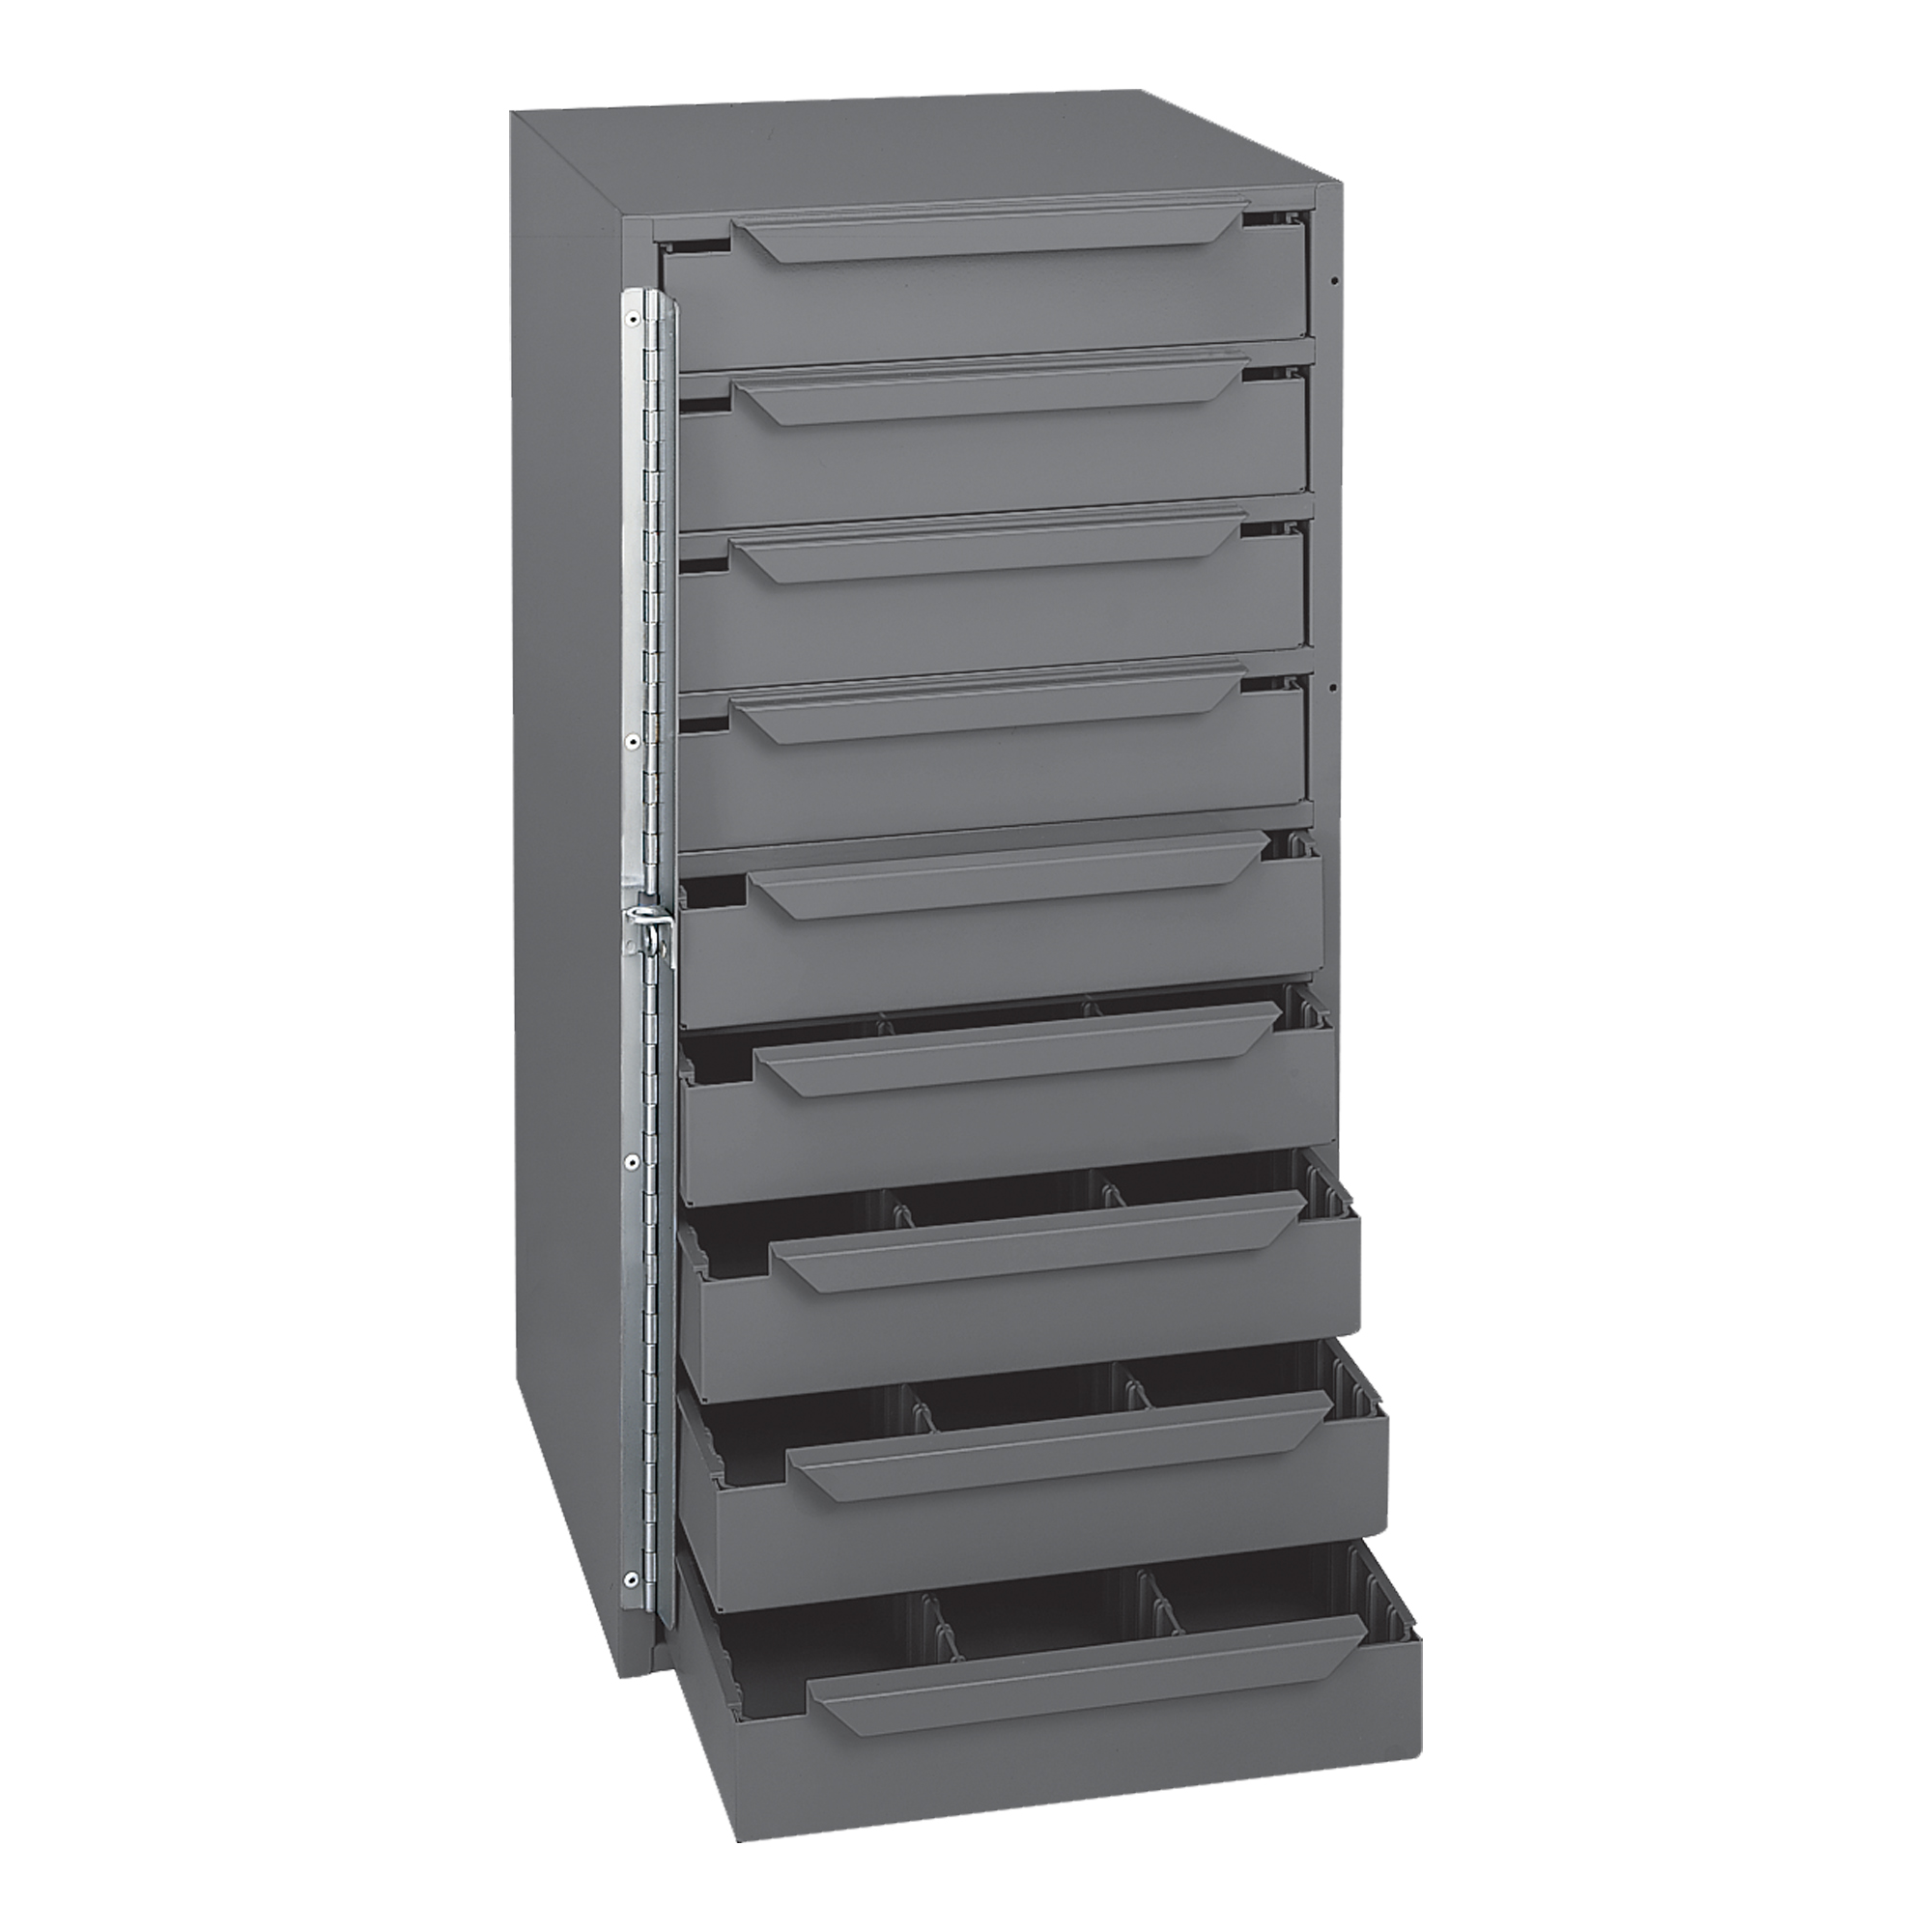 DURHAM MFG 215-95-D571 Drawer,4 to 13 Compartments,Gray 